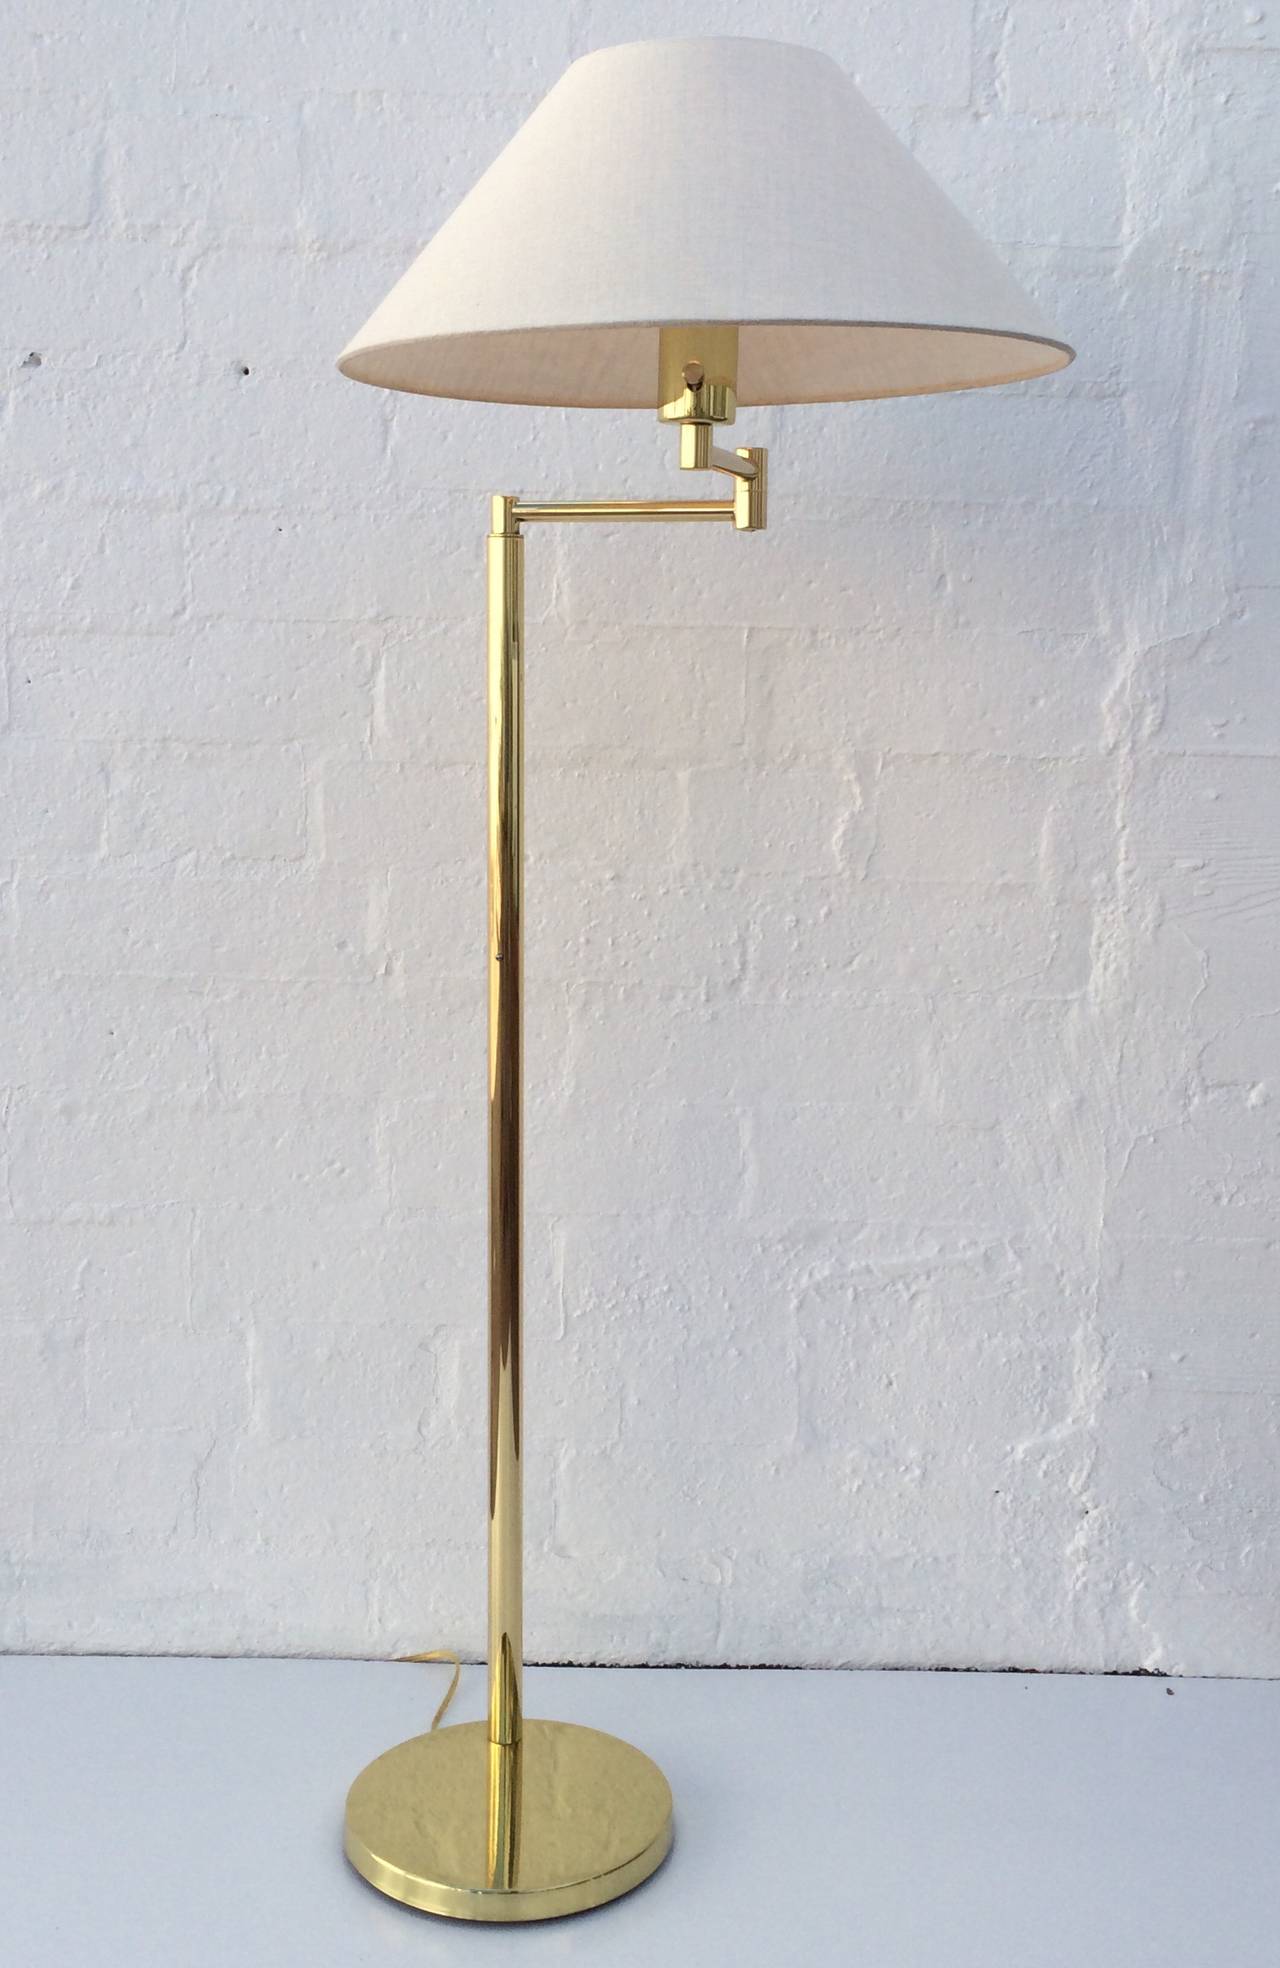 A adjustable polished brass floor lamp designed by Walter Von Nessen, circa 1970s. 
Adjusts up and down with the arm swinging forward and back. 
Newly rewired and professionally polished. 
New linen shade.